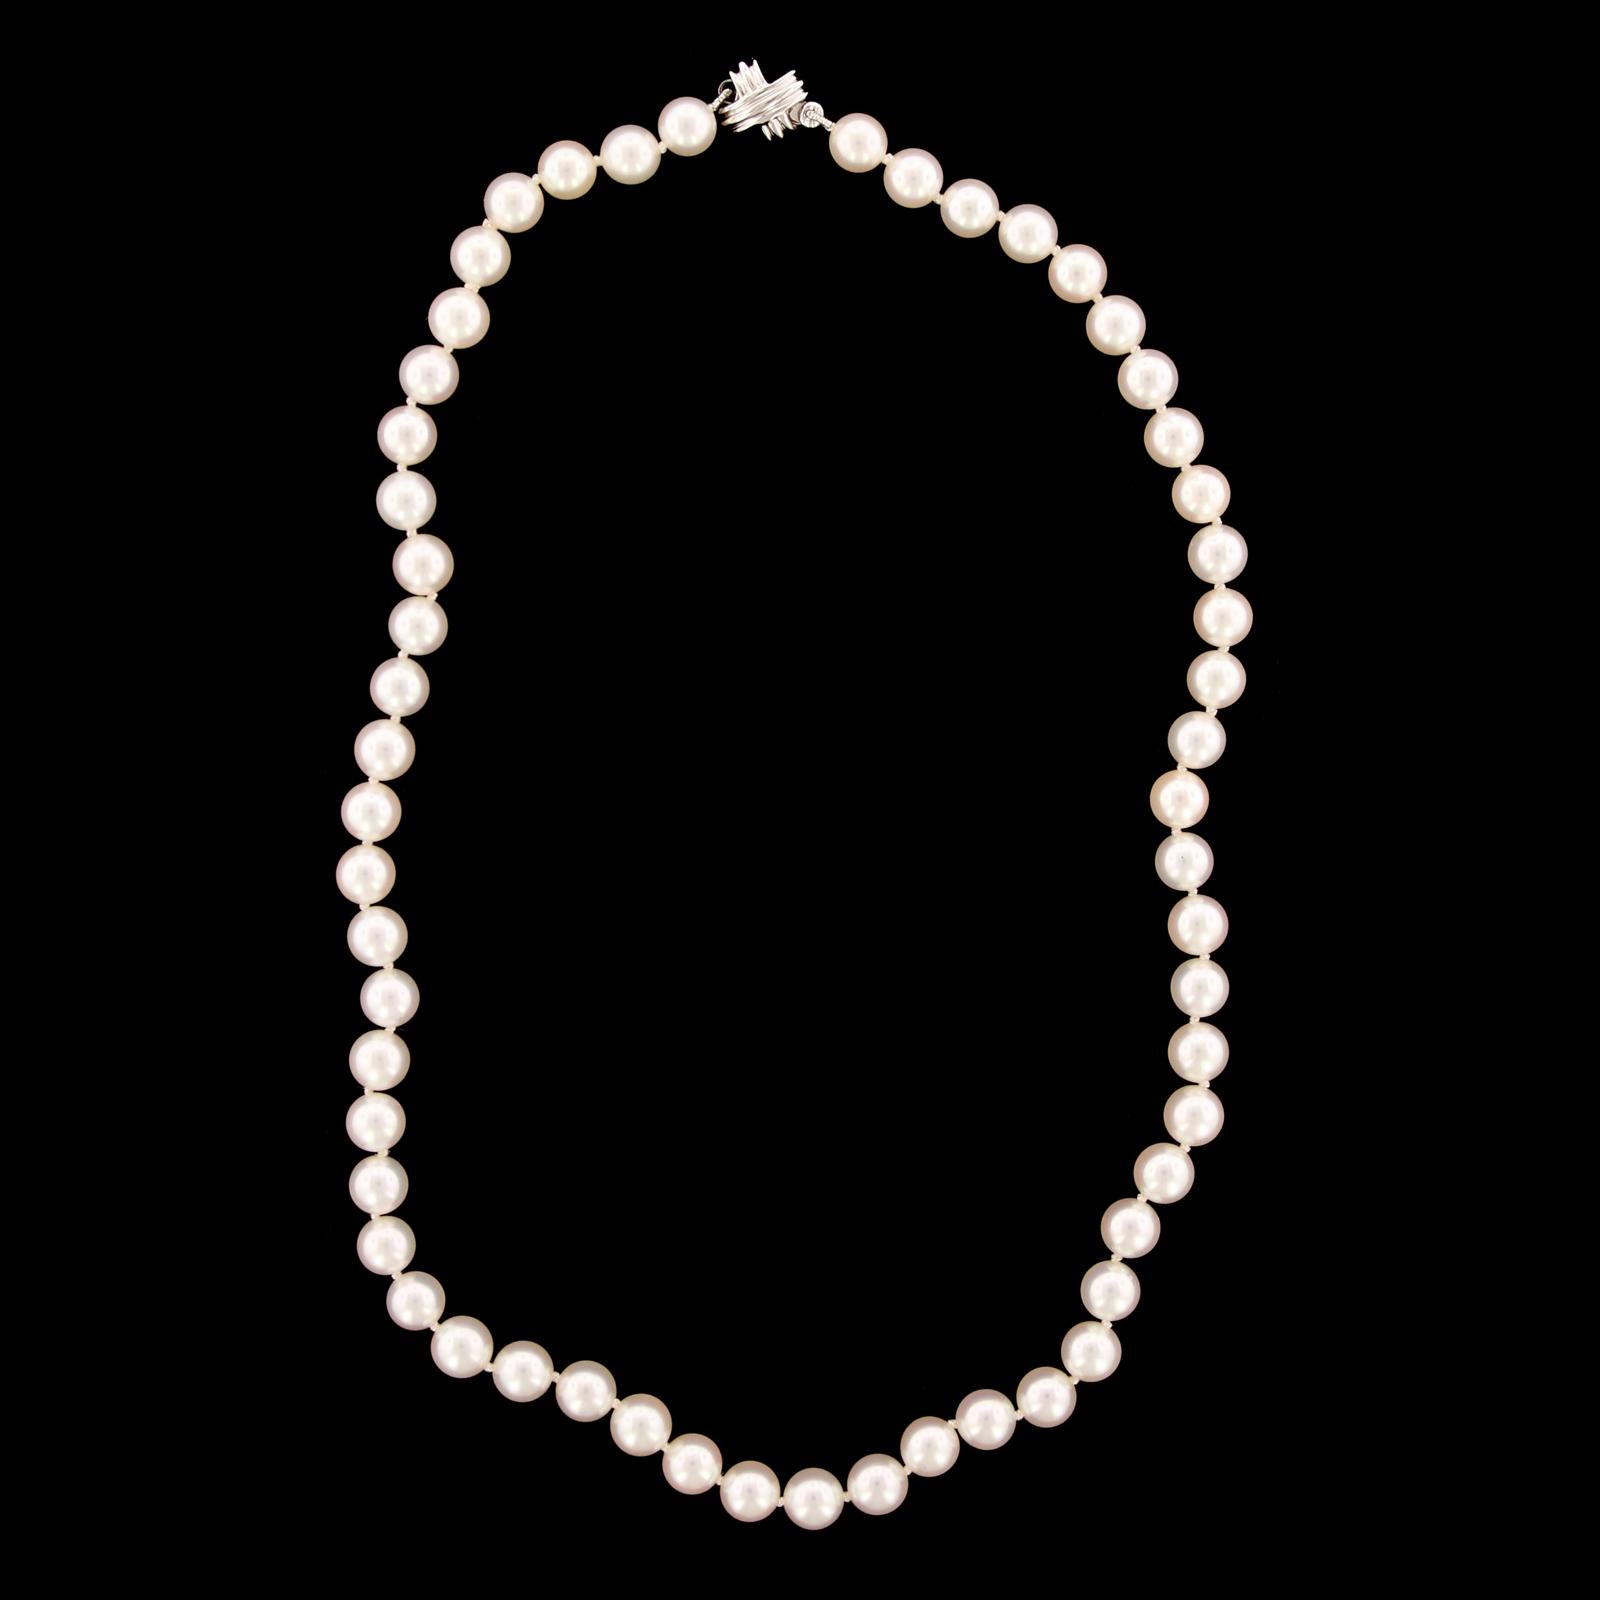 Tiffany & Co. Cultured Pearl Necklace. The necklace is comprosed of 56 cultured
pearls each measuring 6.50 to 7.00mm., completed by an 18K white gold signature
clasp, length 16